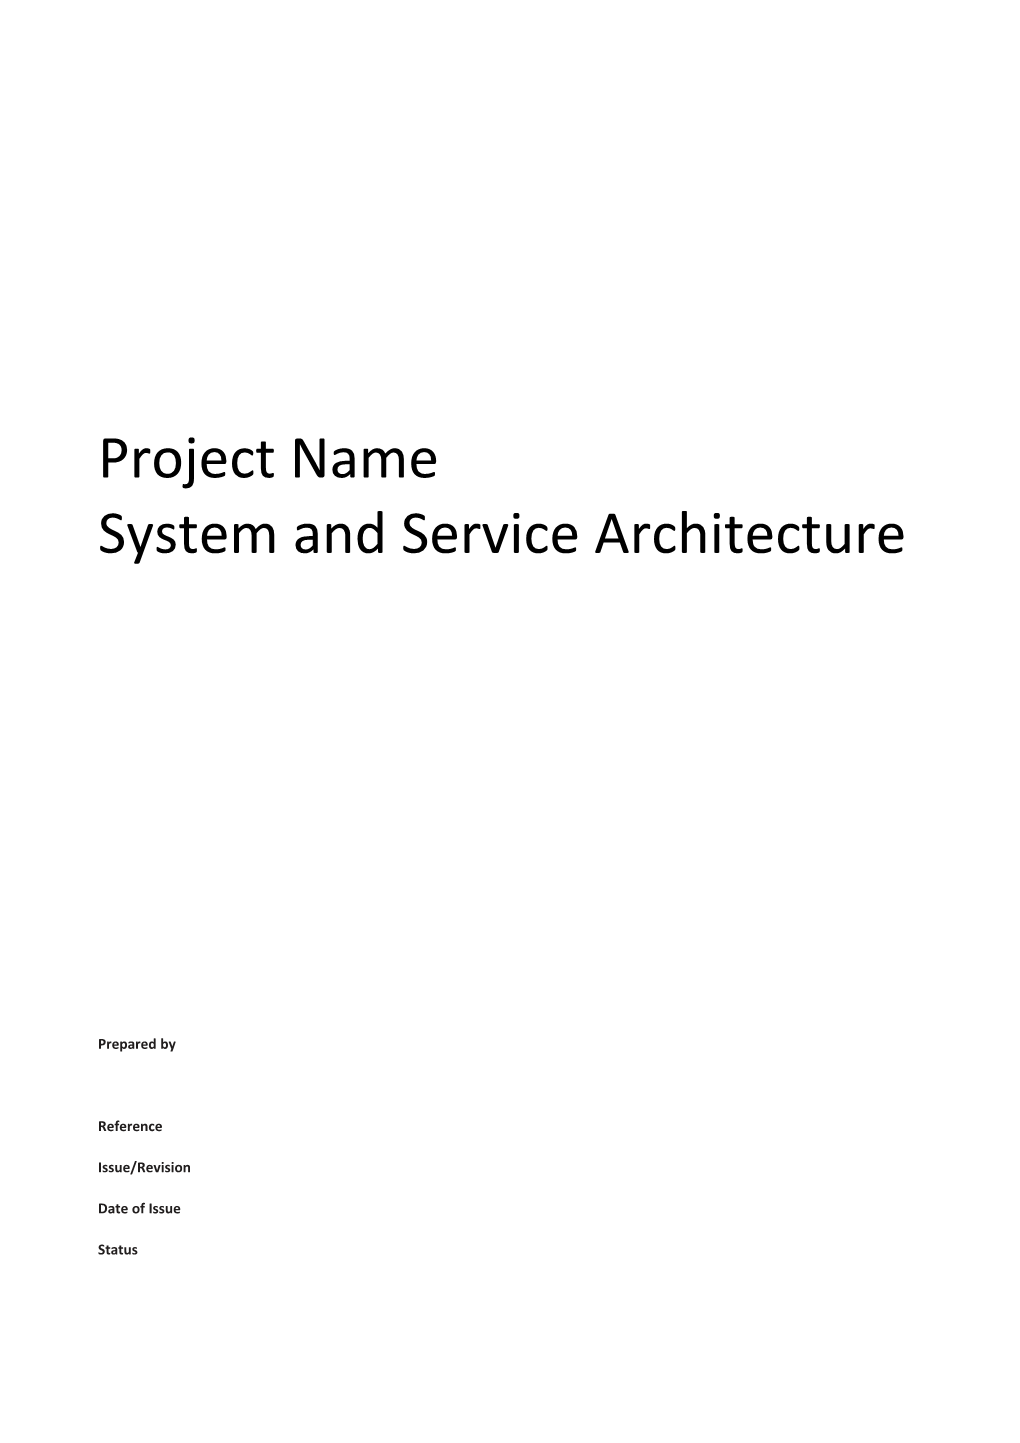 System and Service Architecture